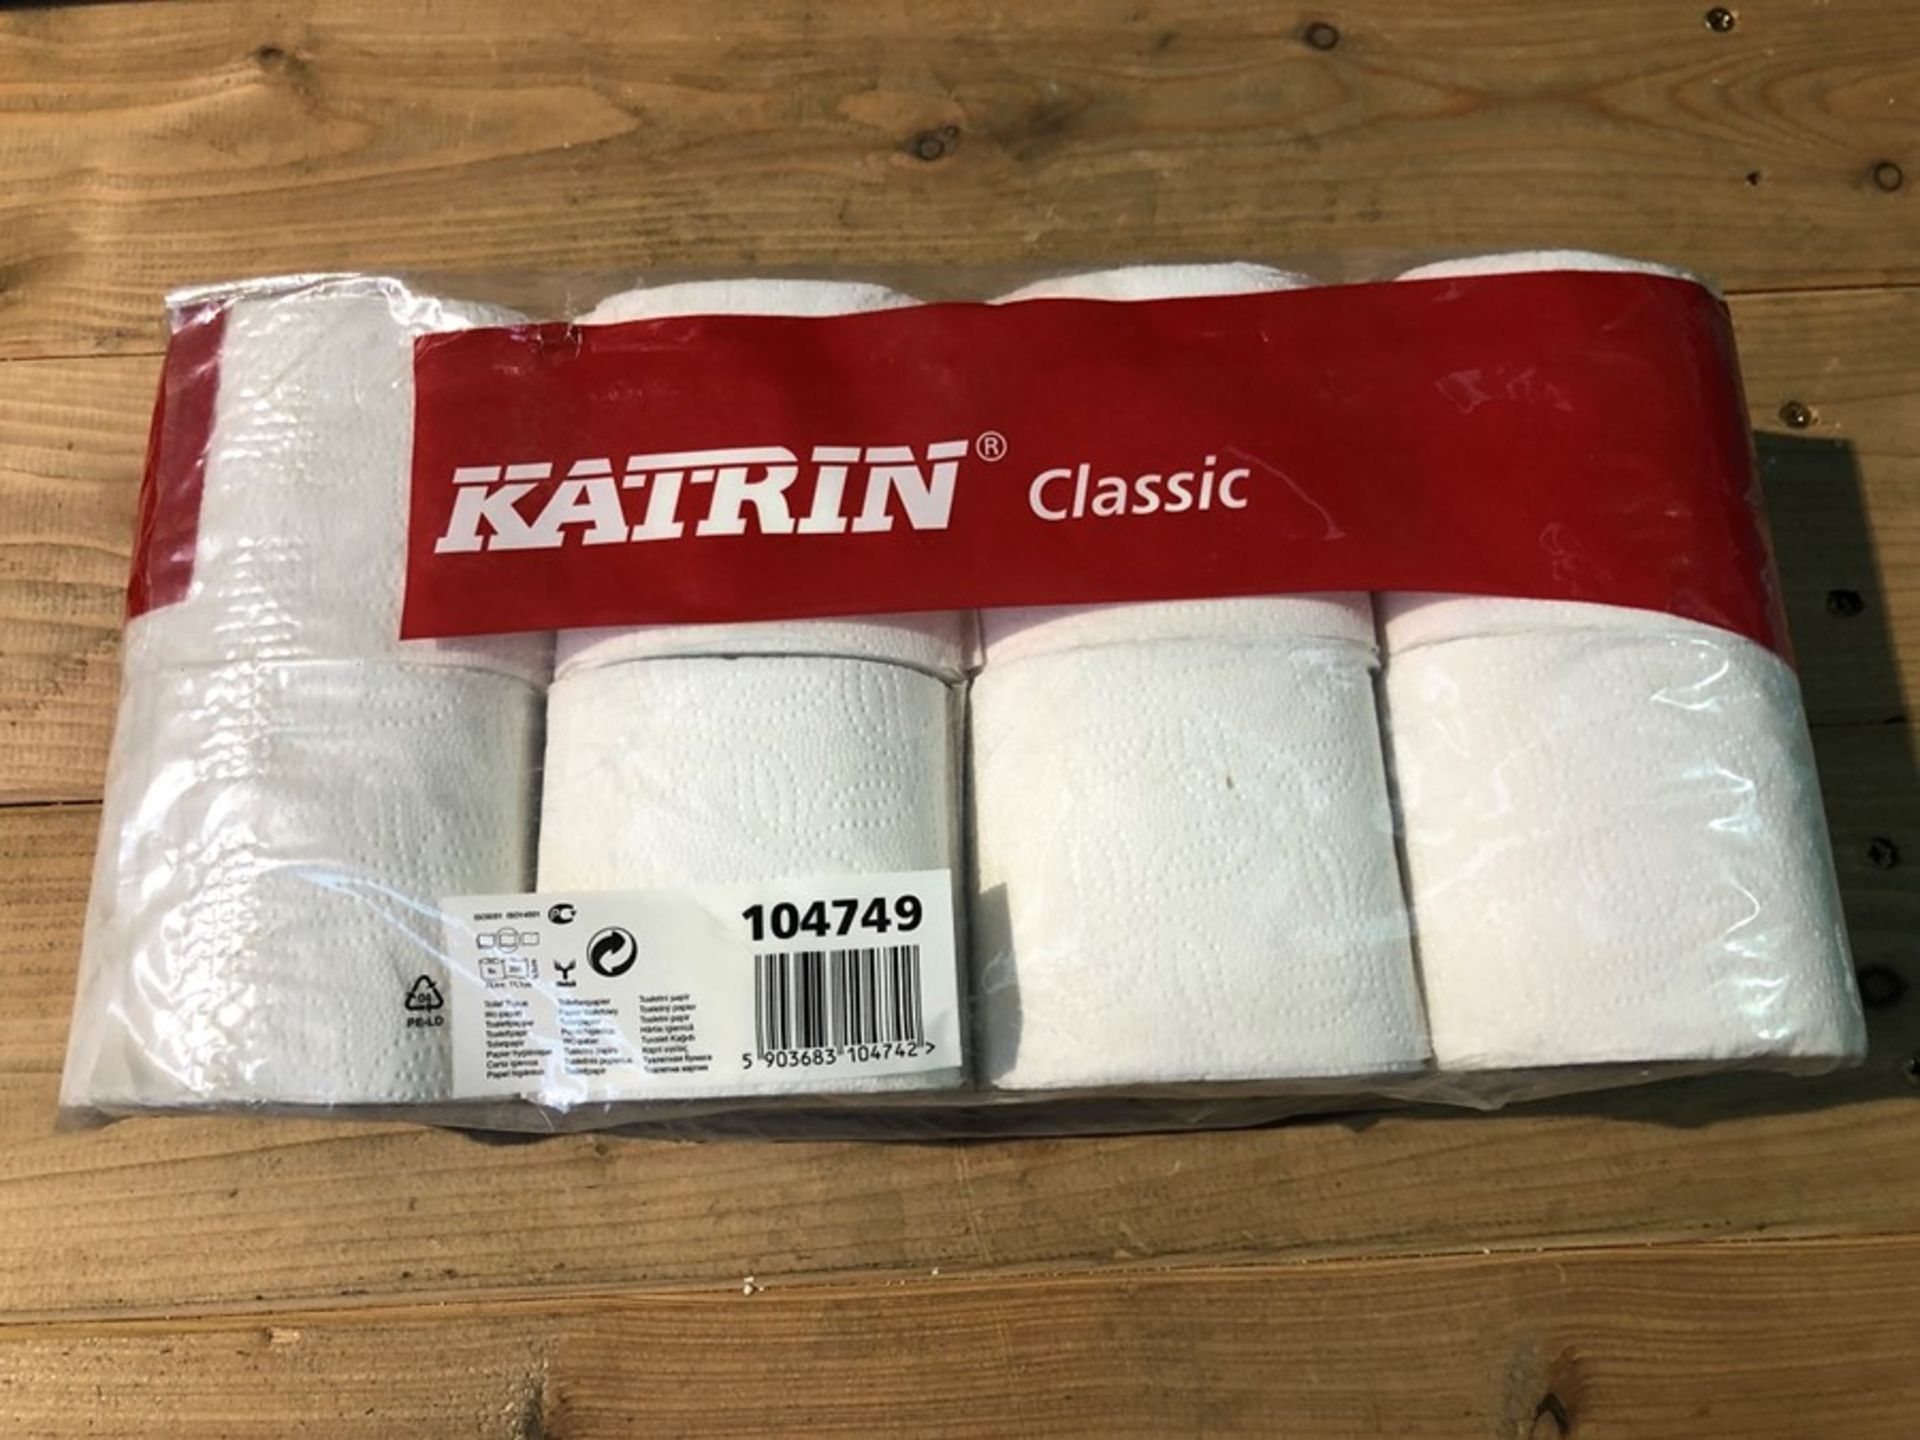 1 PACK OF 8 KATRIN CLASSIC TOILET ROLL (PUBLIC VIEWING AVAILABLE)